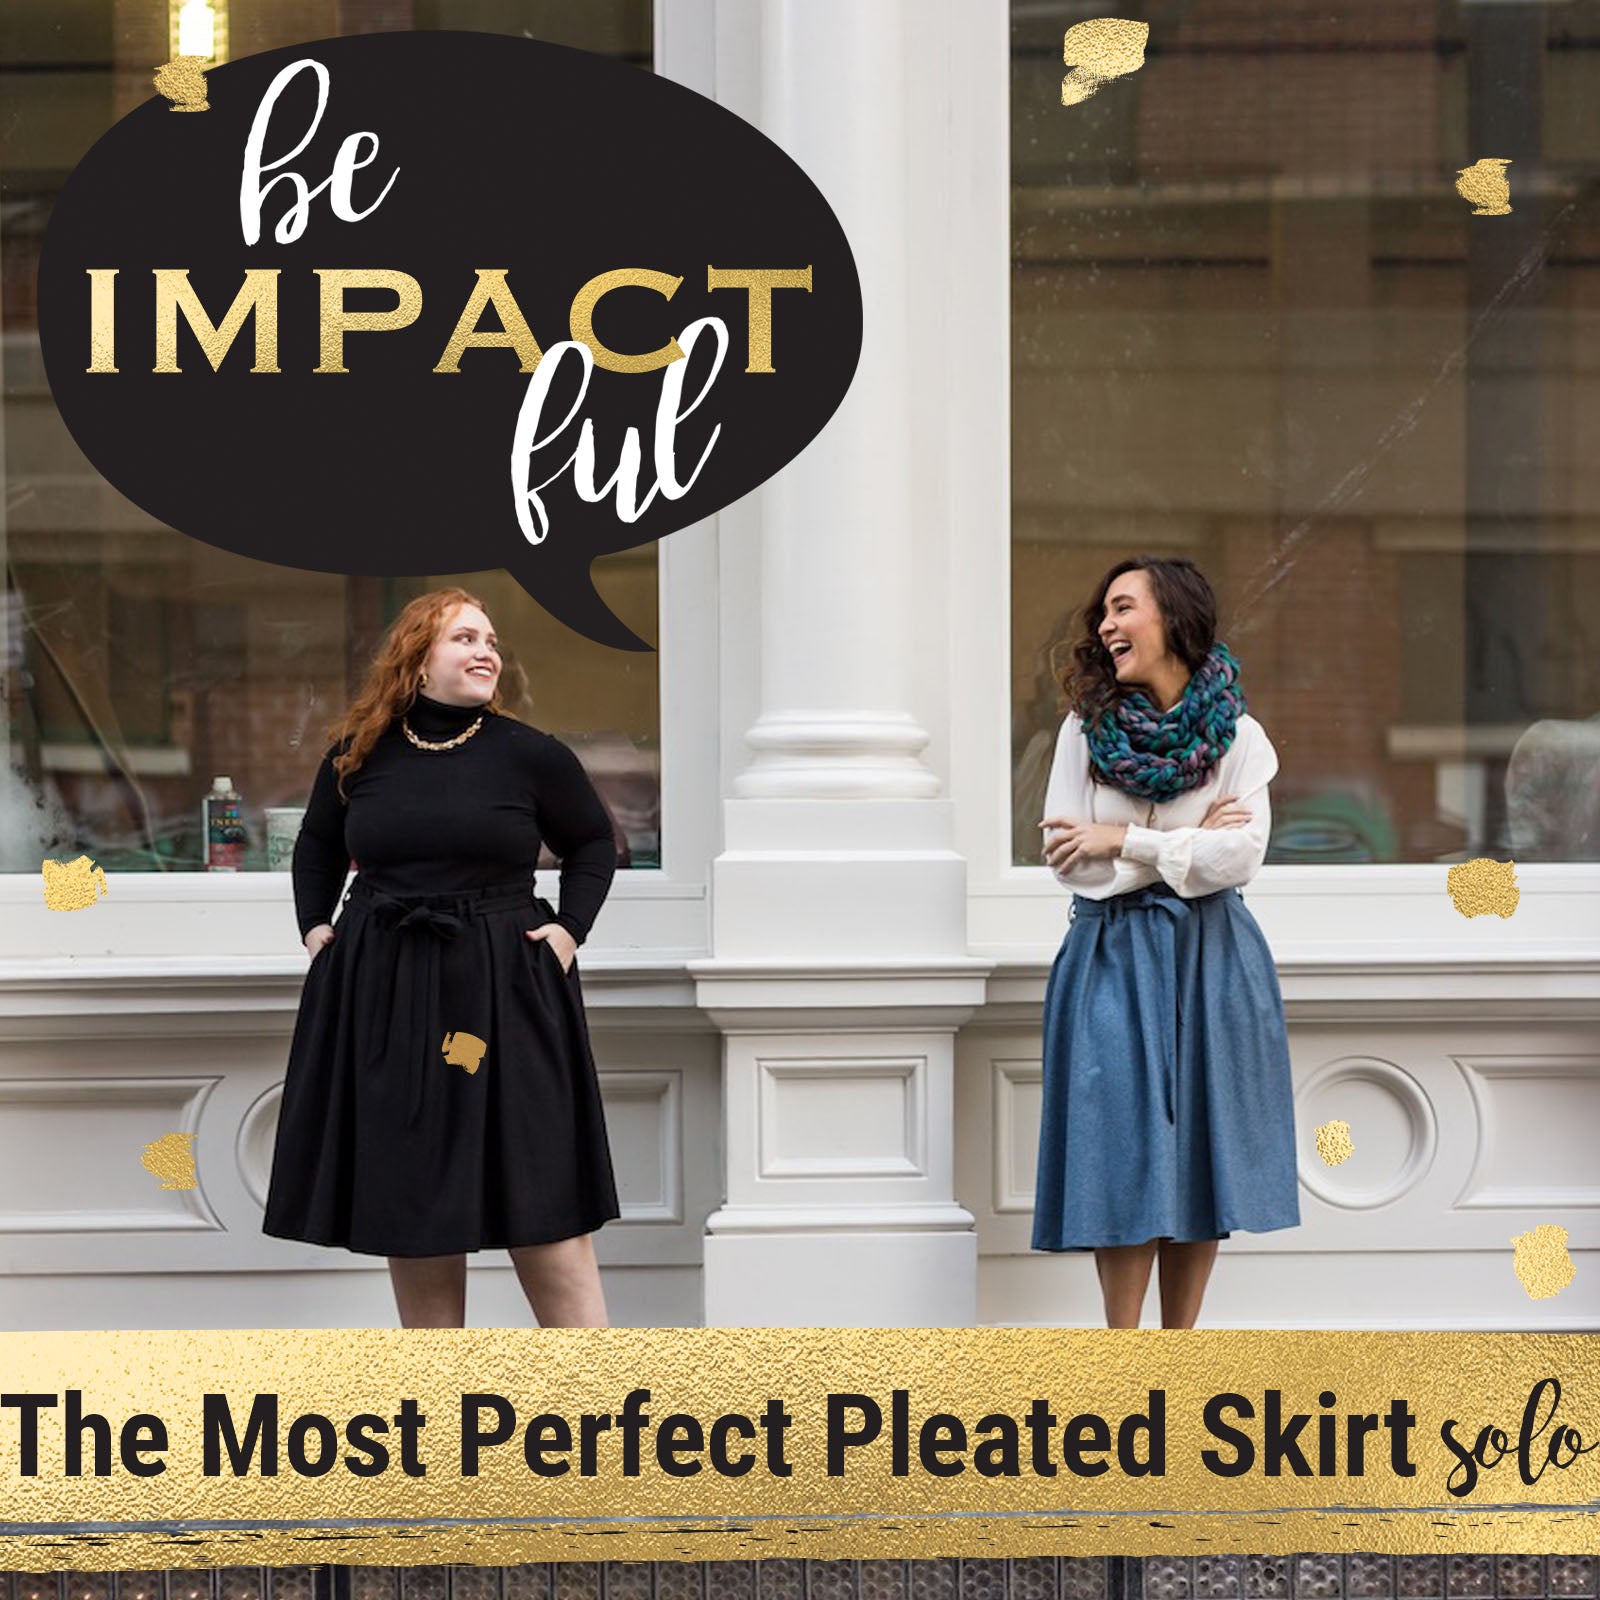 The Most Perfect Pleated Skirt- Special Solo Episode!